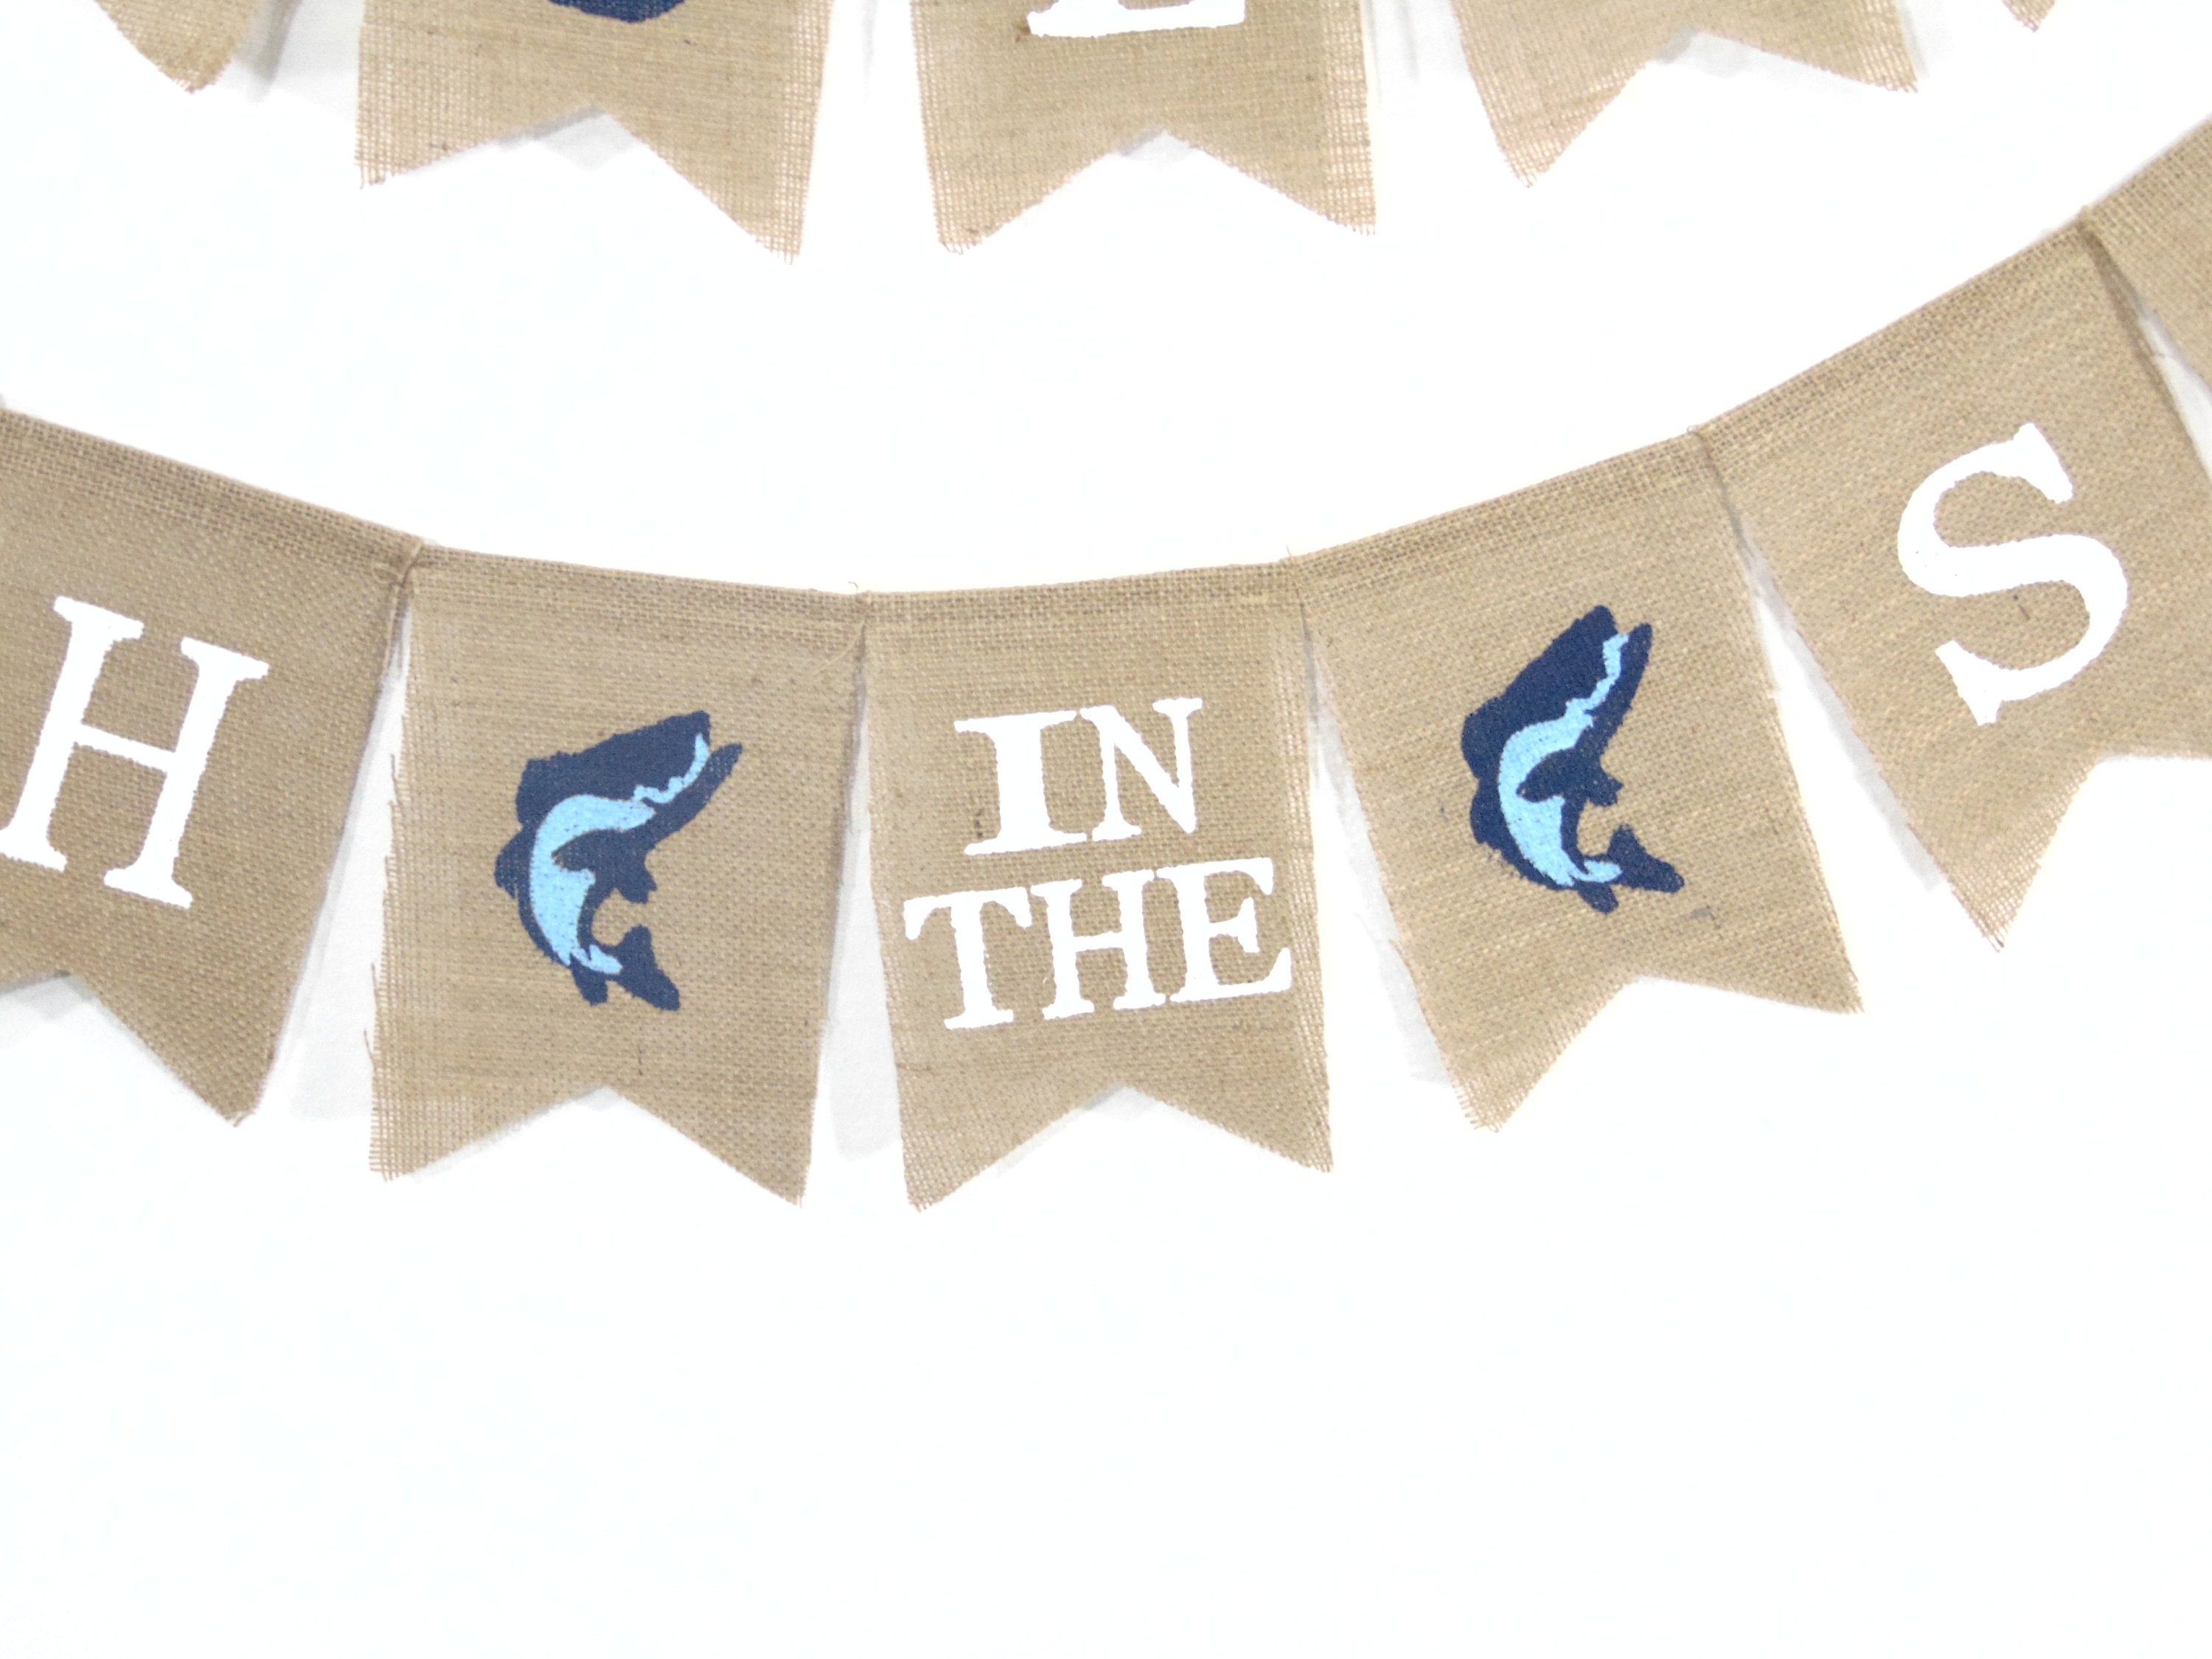 Two Less Fish in the Sea Banner, Nautical Wedding, Nautical Bridal Shower  Banner, Bridal Shower Decorations, Couples Shower Decorations 